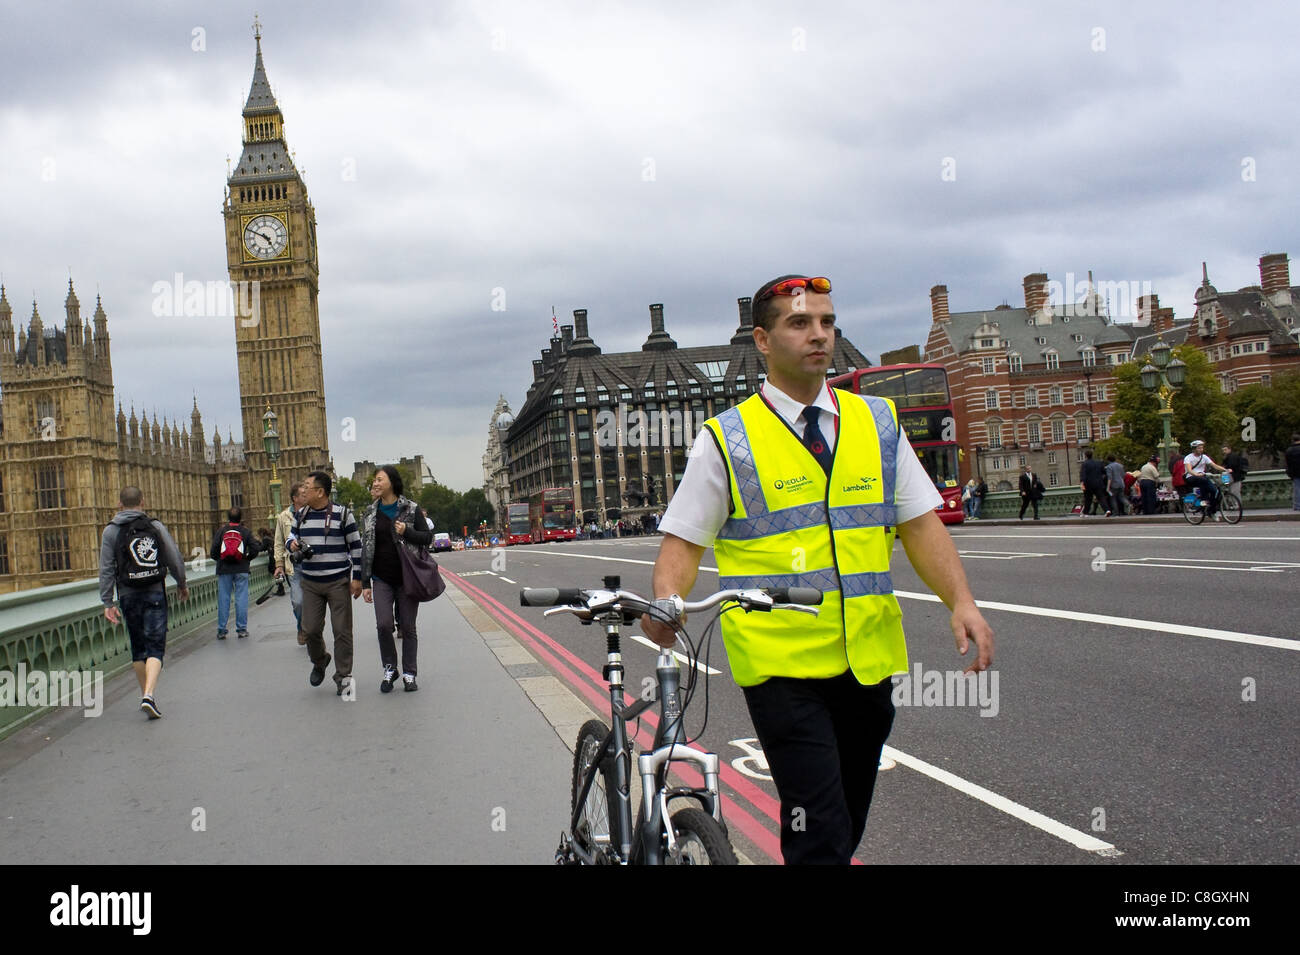 A man in work uniform and a high visibility vest walks his bike across Westminster Bridge in London Stock Photo